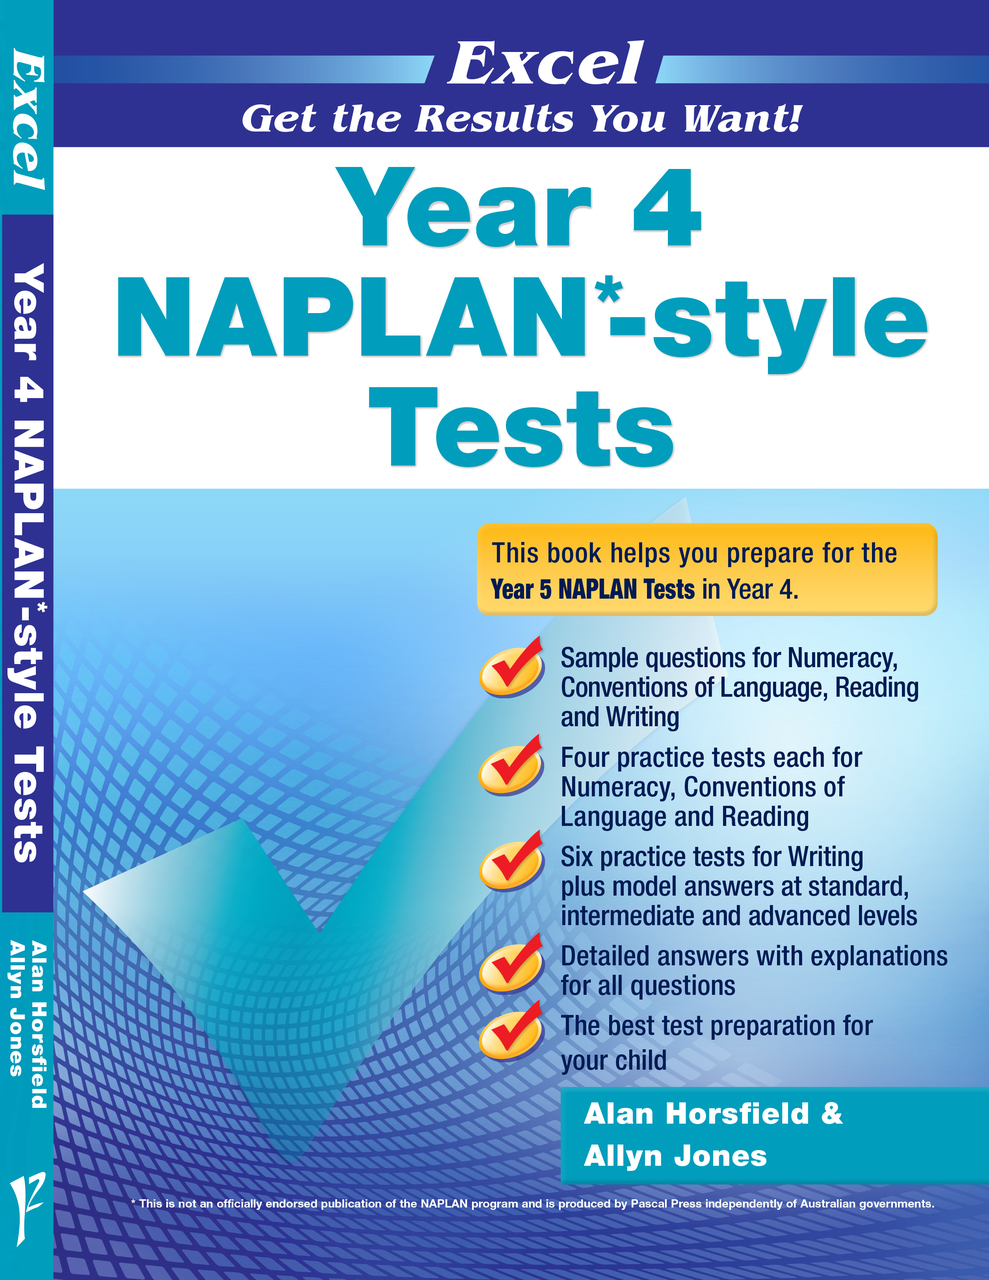 EXCEL - YEAR 4 NAPLAN*-STYLE TESTS